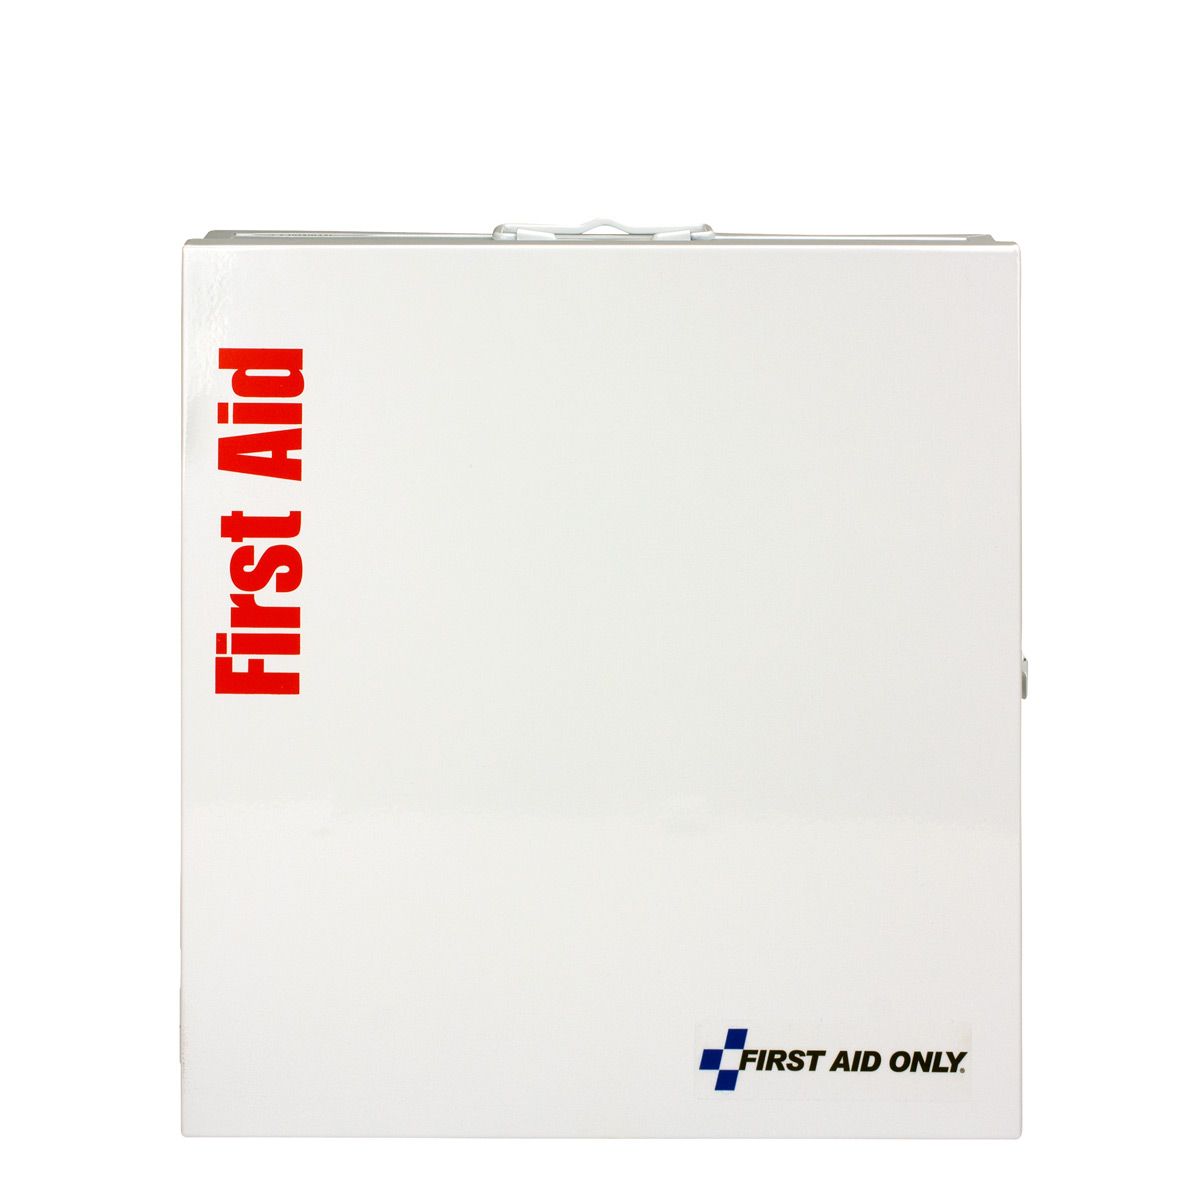 First Aid Only 50-Person Large Metal SmartCompliance First Aid Cabinet with Medication from Columbia Safety